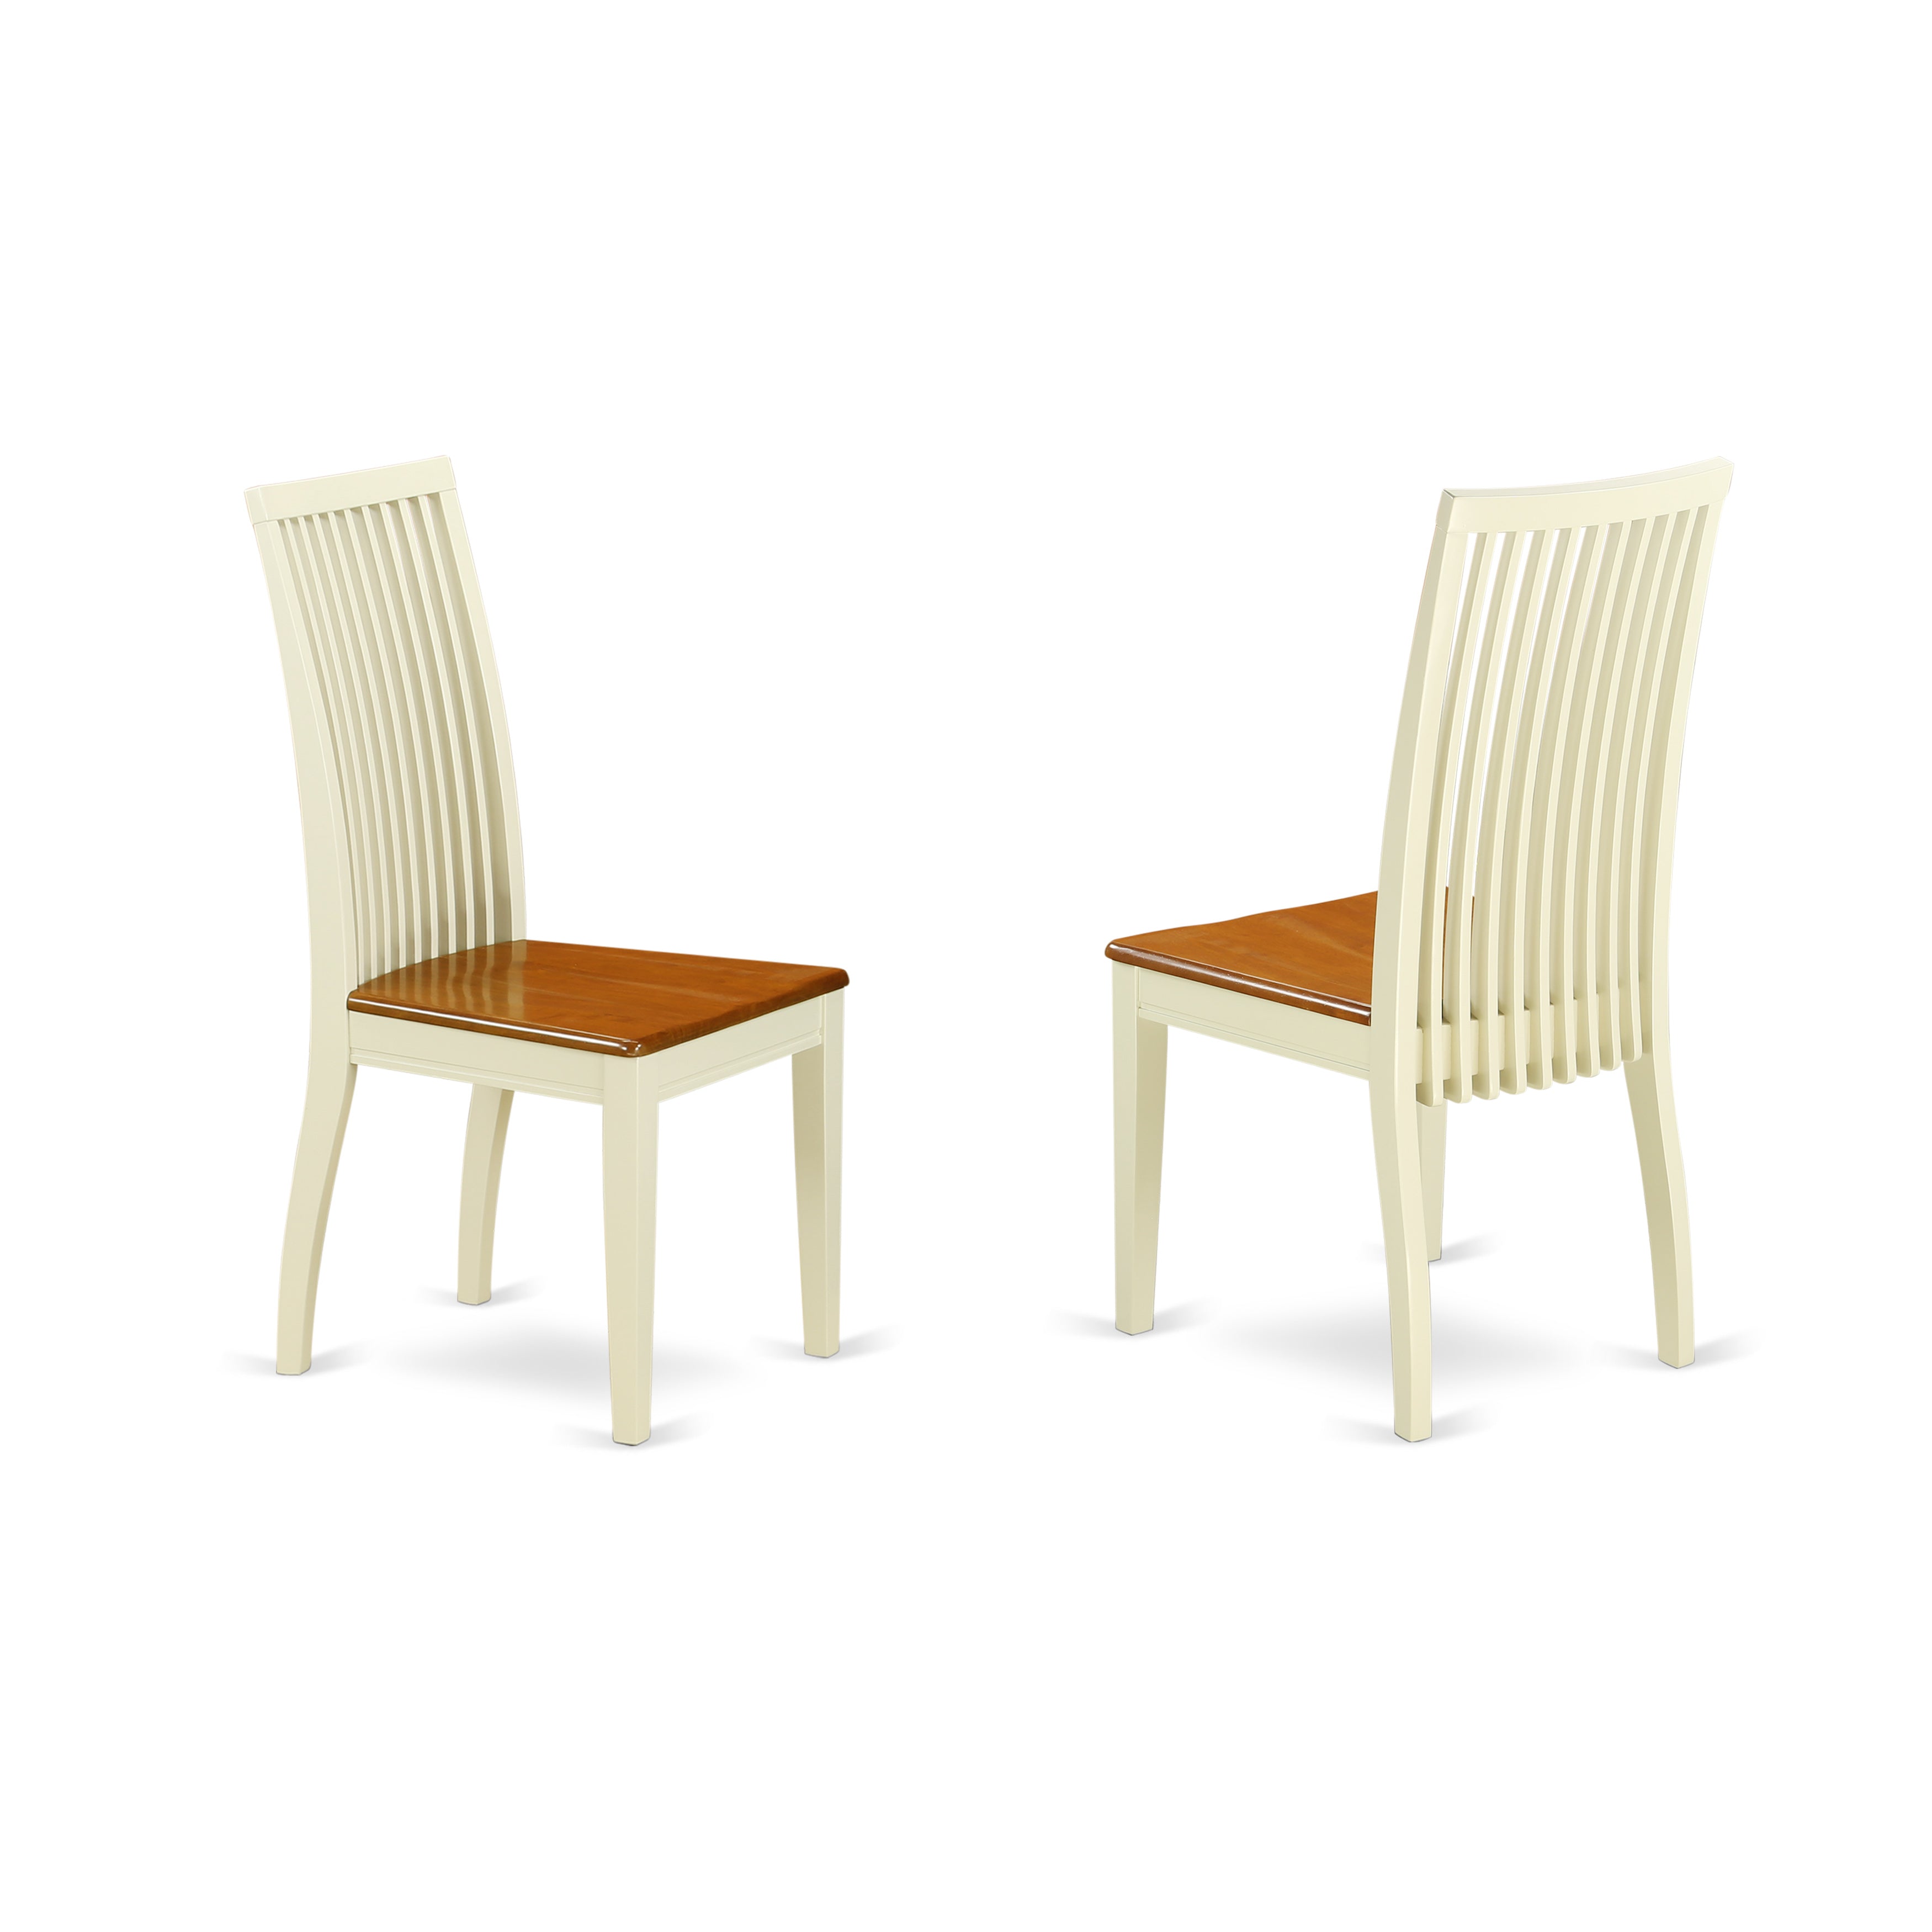 IPC-BMK-W Ipswich Dining chair with slatted back in buttermilk & cherry